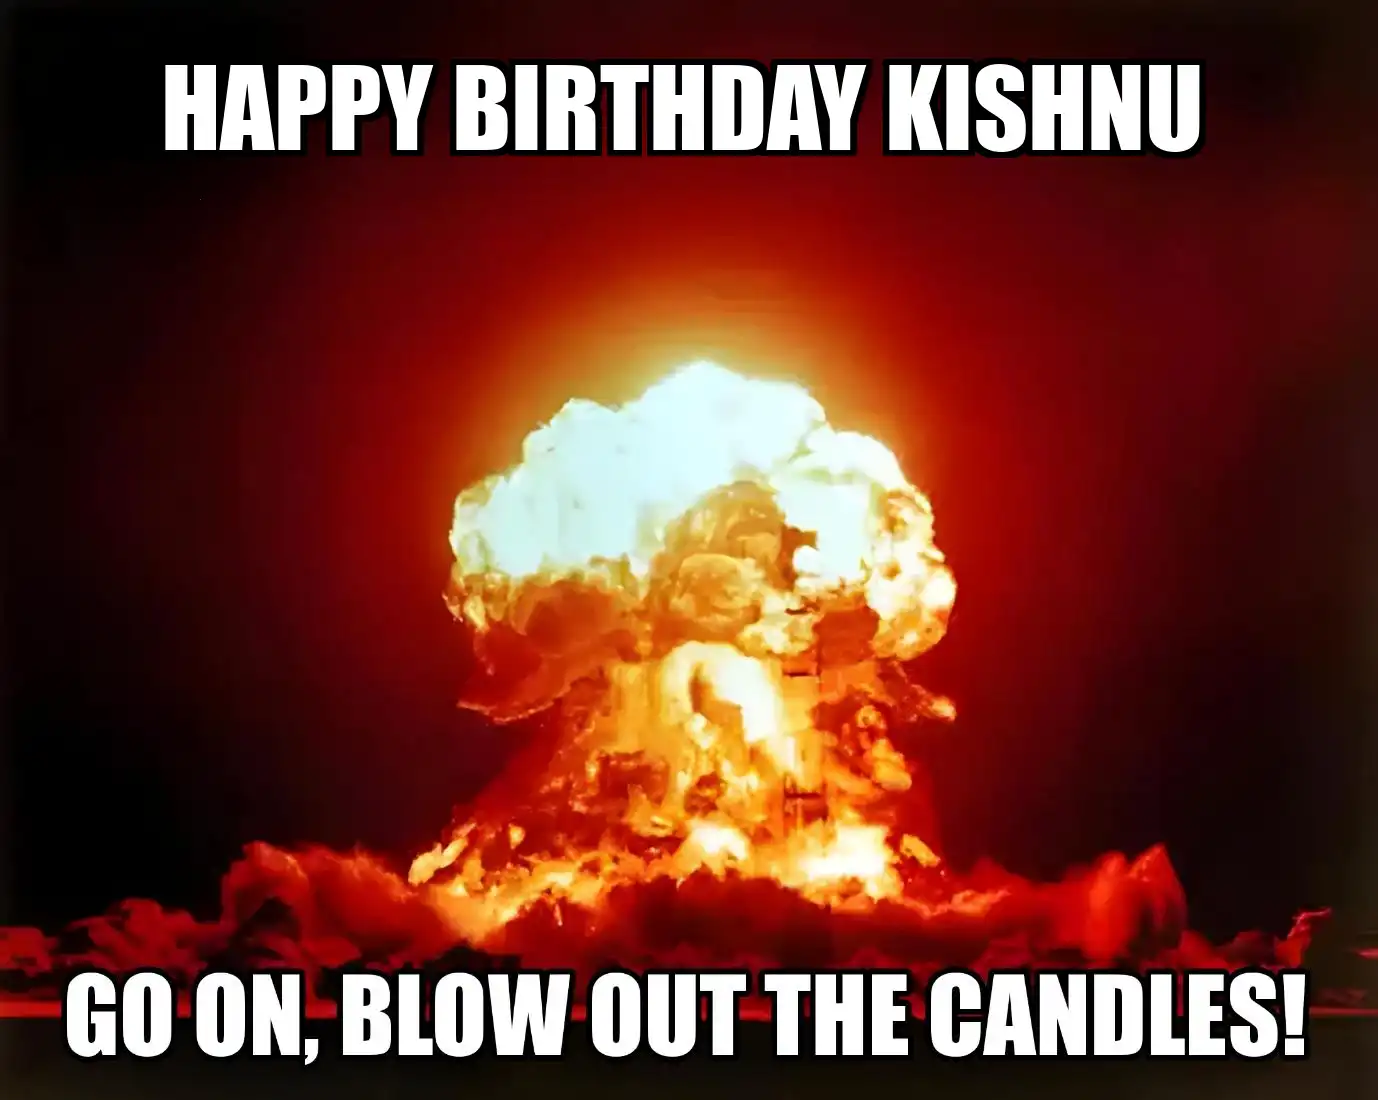 Happy Birthday Kishnu Go On Blow Out The Candles Meme